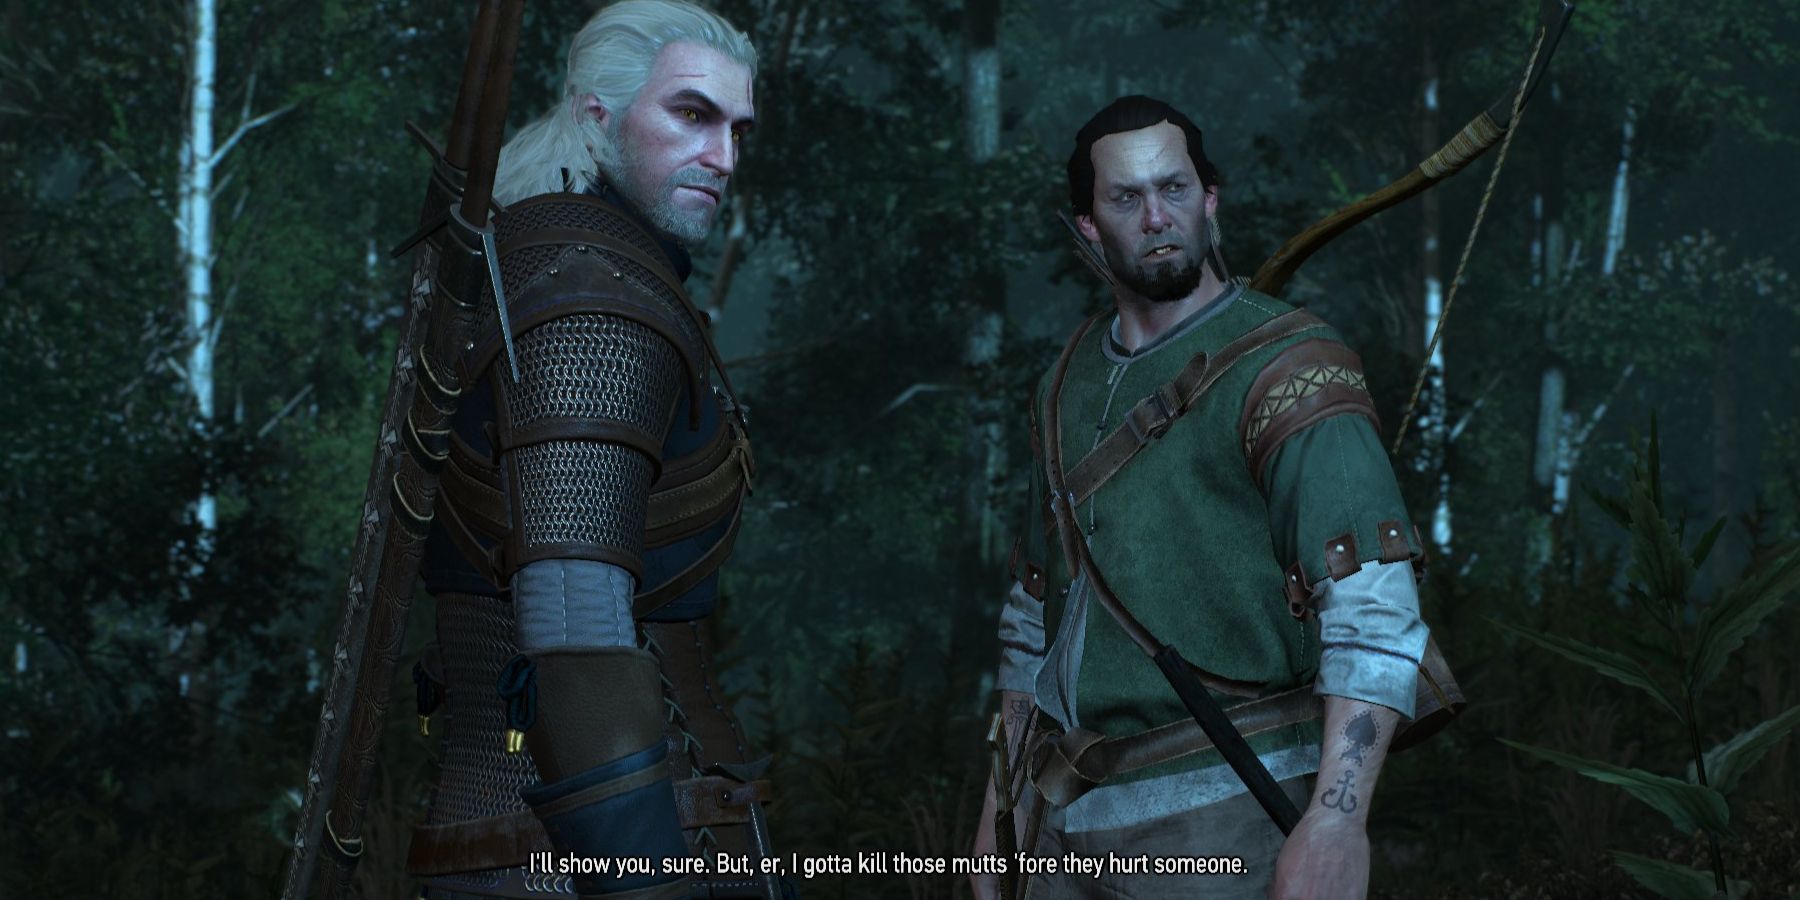 The Witcher 3 Geralt and the Hunter